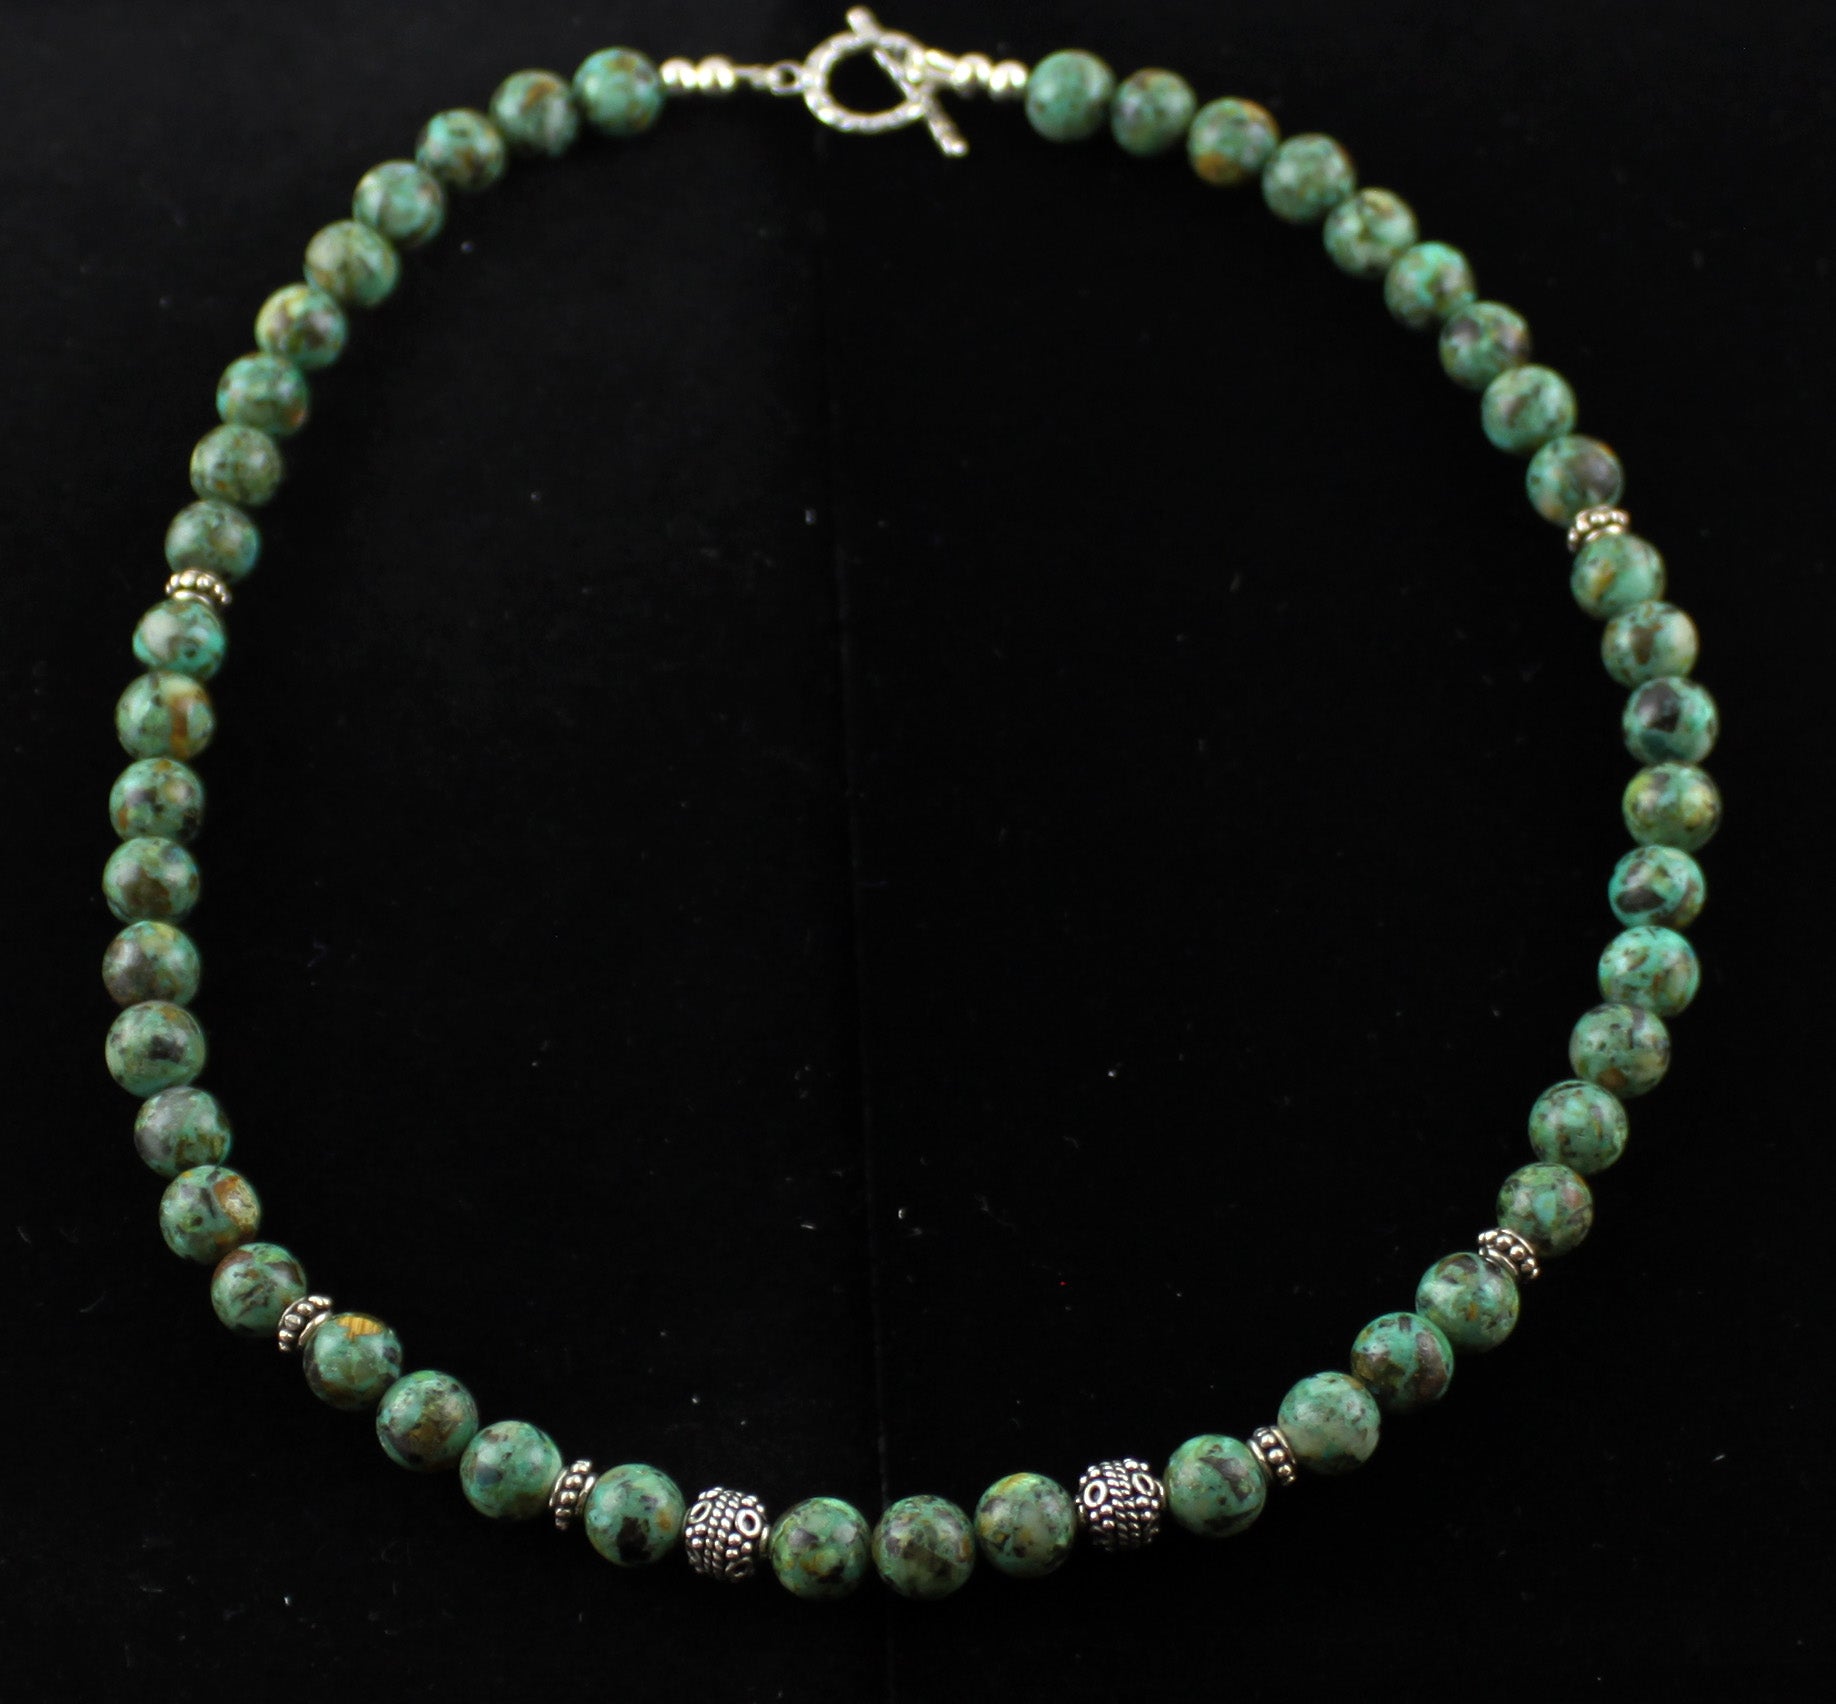 African Turquoise & Bali Bead Necklace